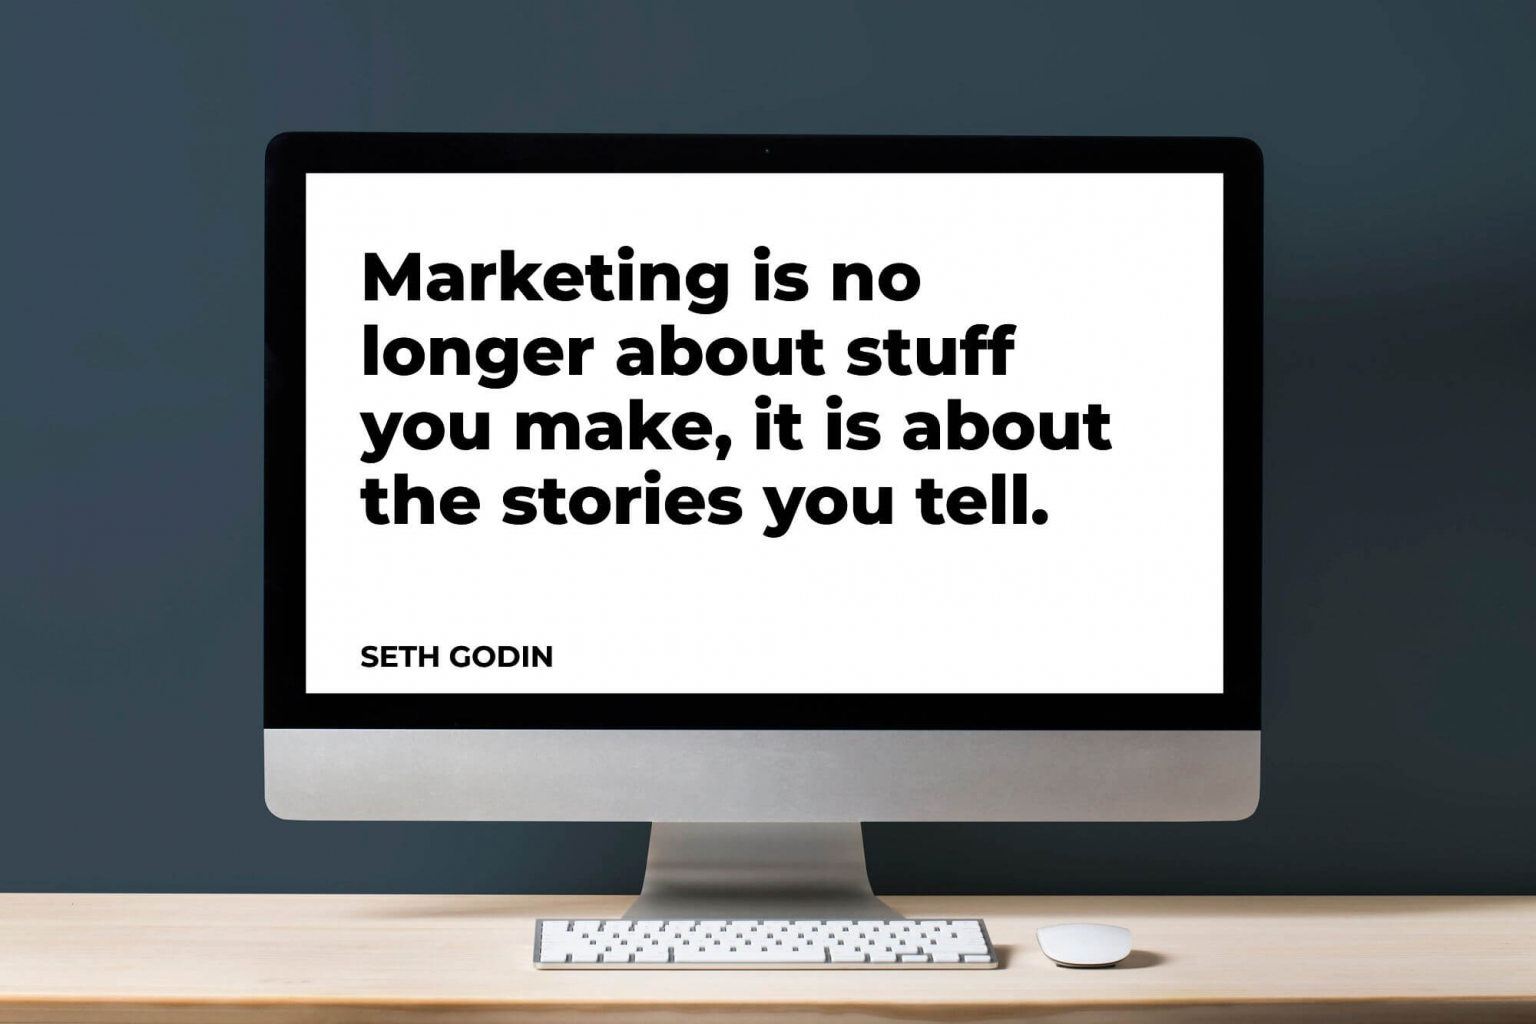 Marketing is about the stories you tell.